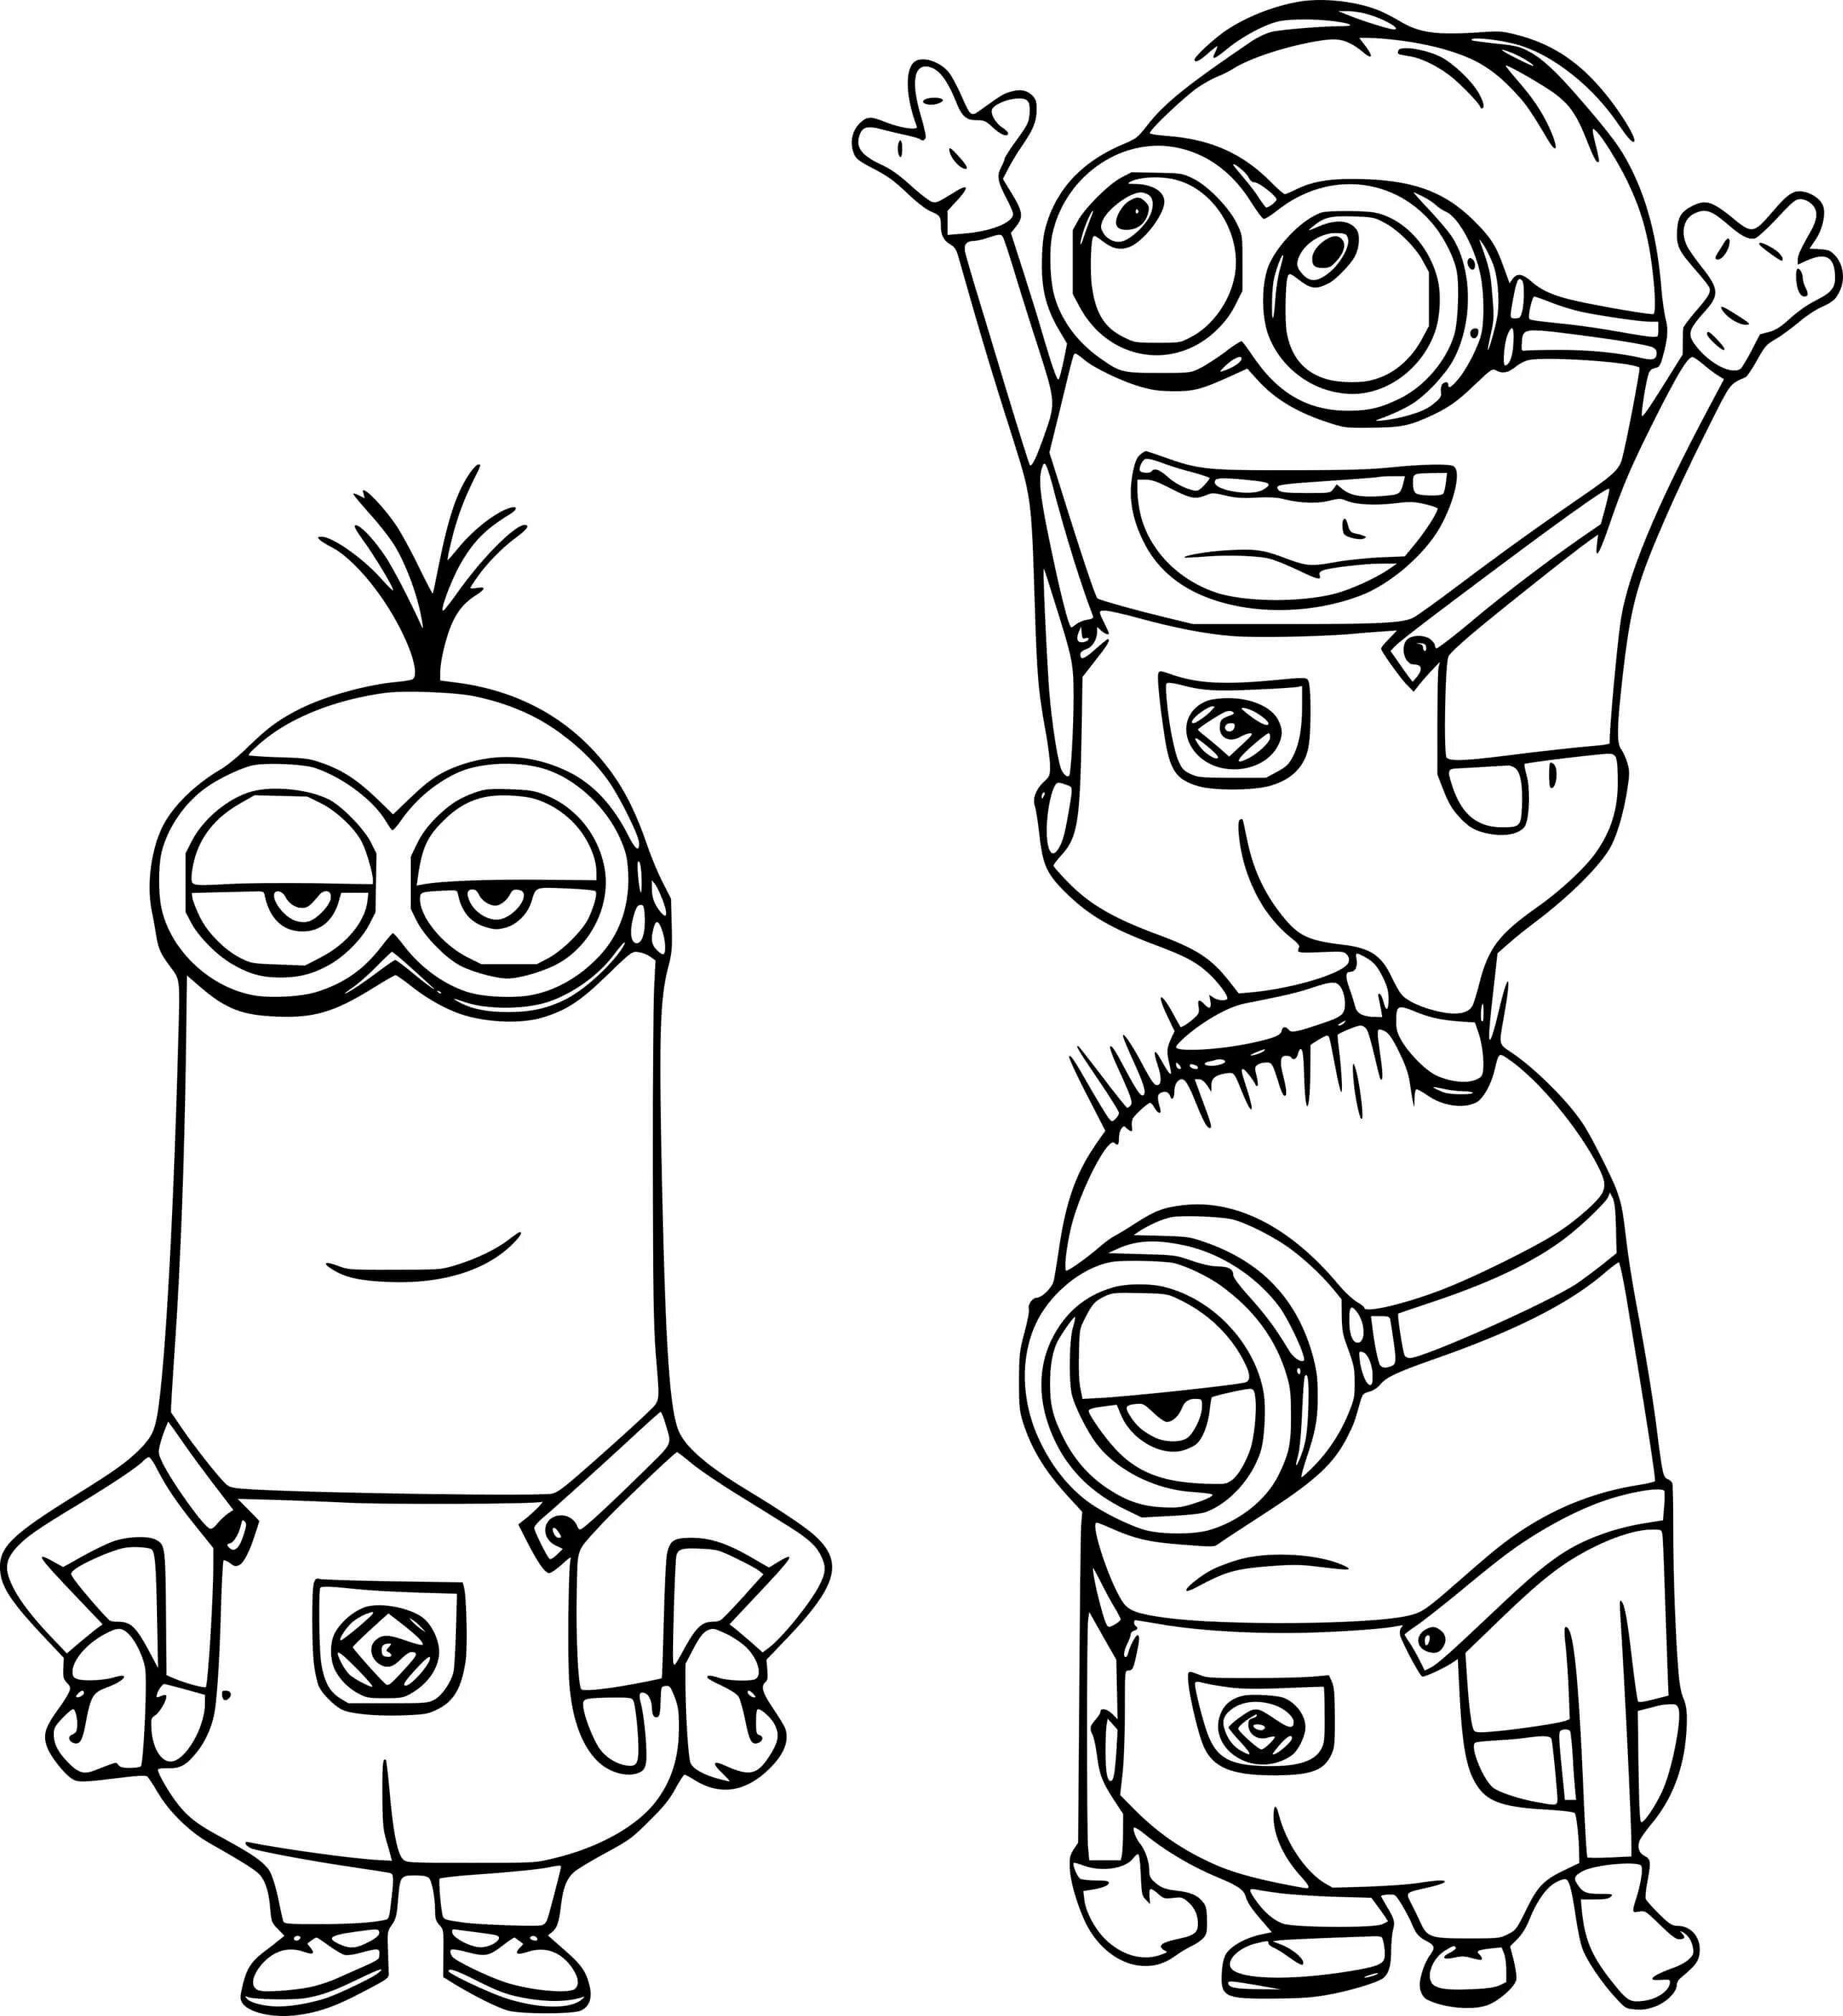 Extraordinary kevin the minion coloring book